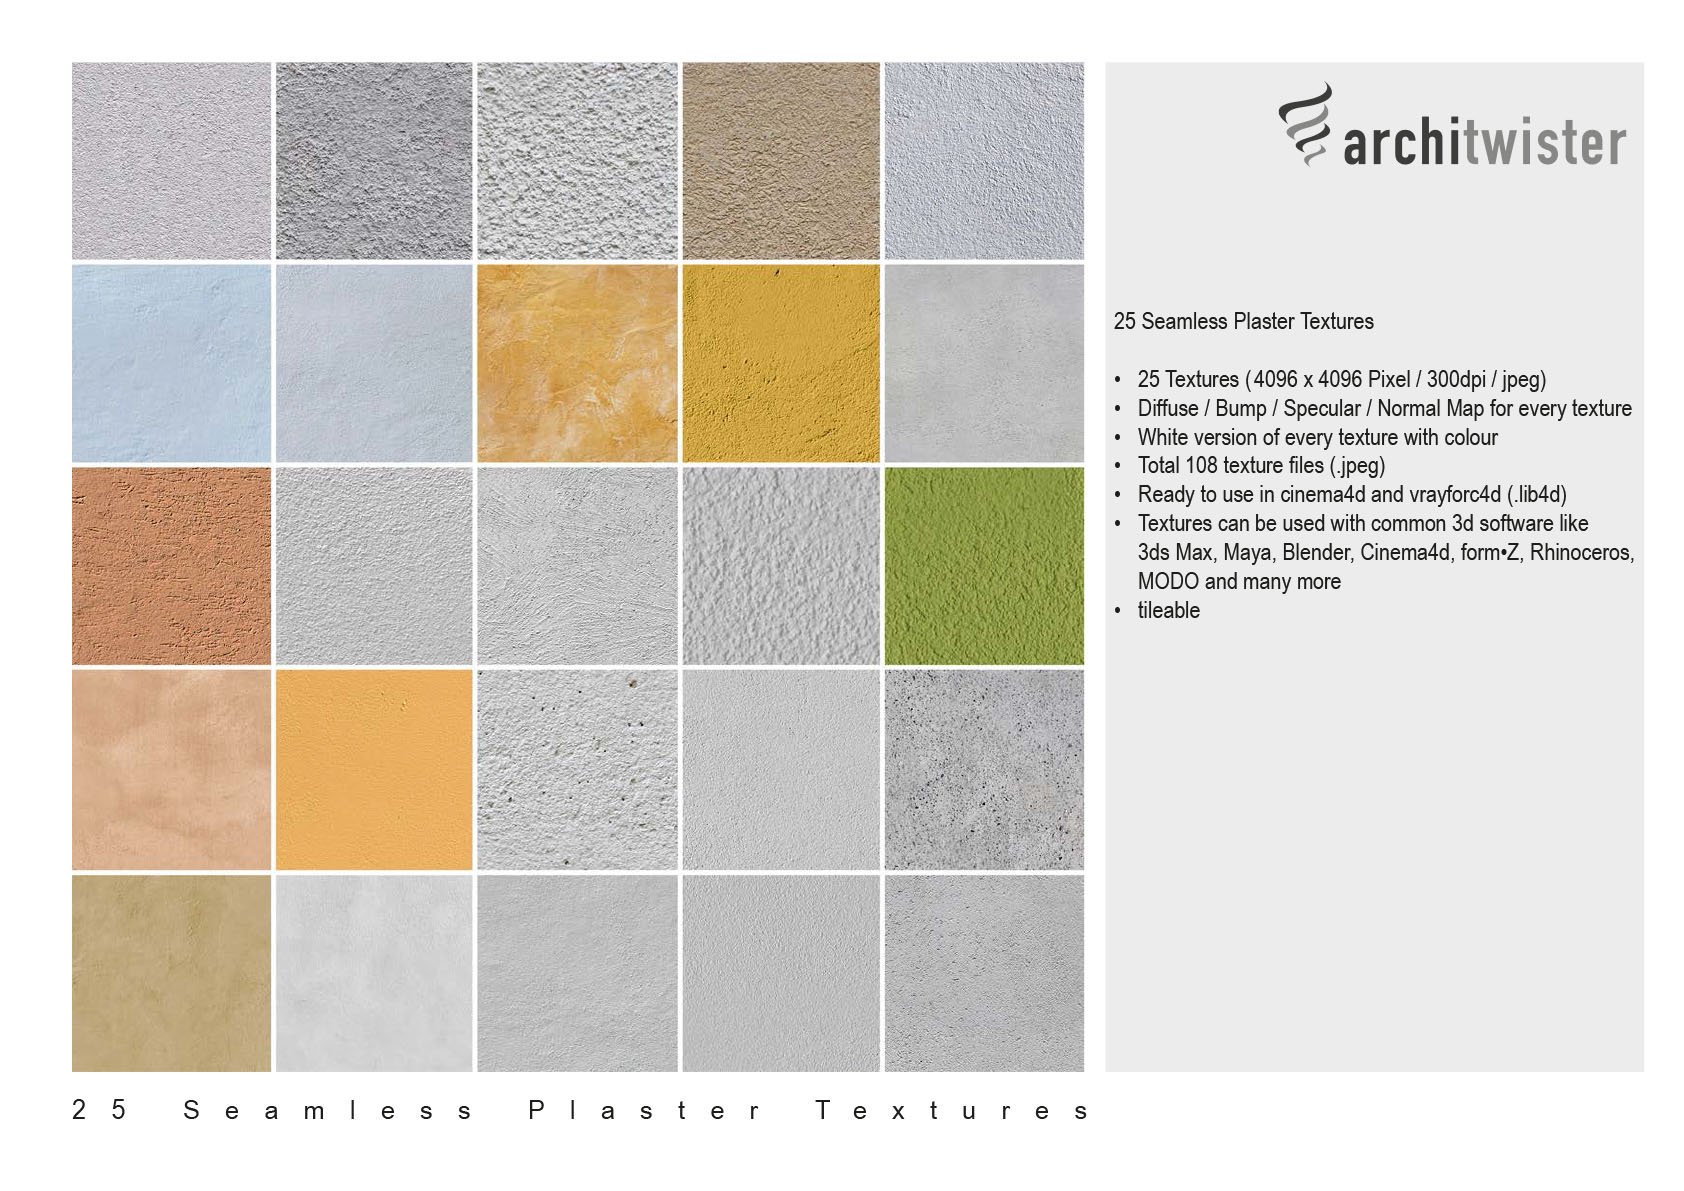 25 Seamless Plaster Textures preview image.